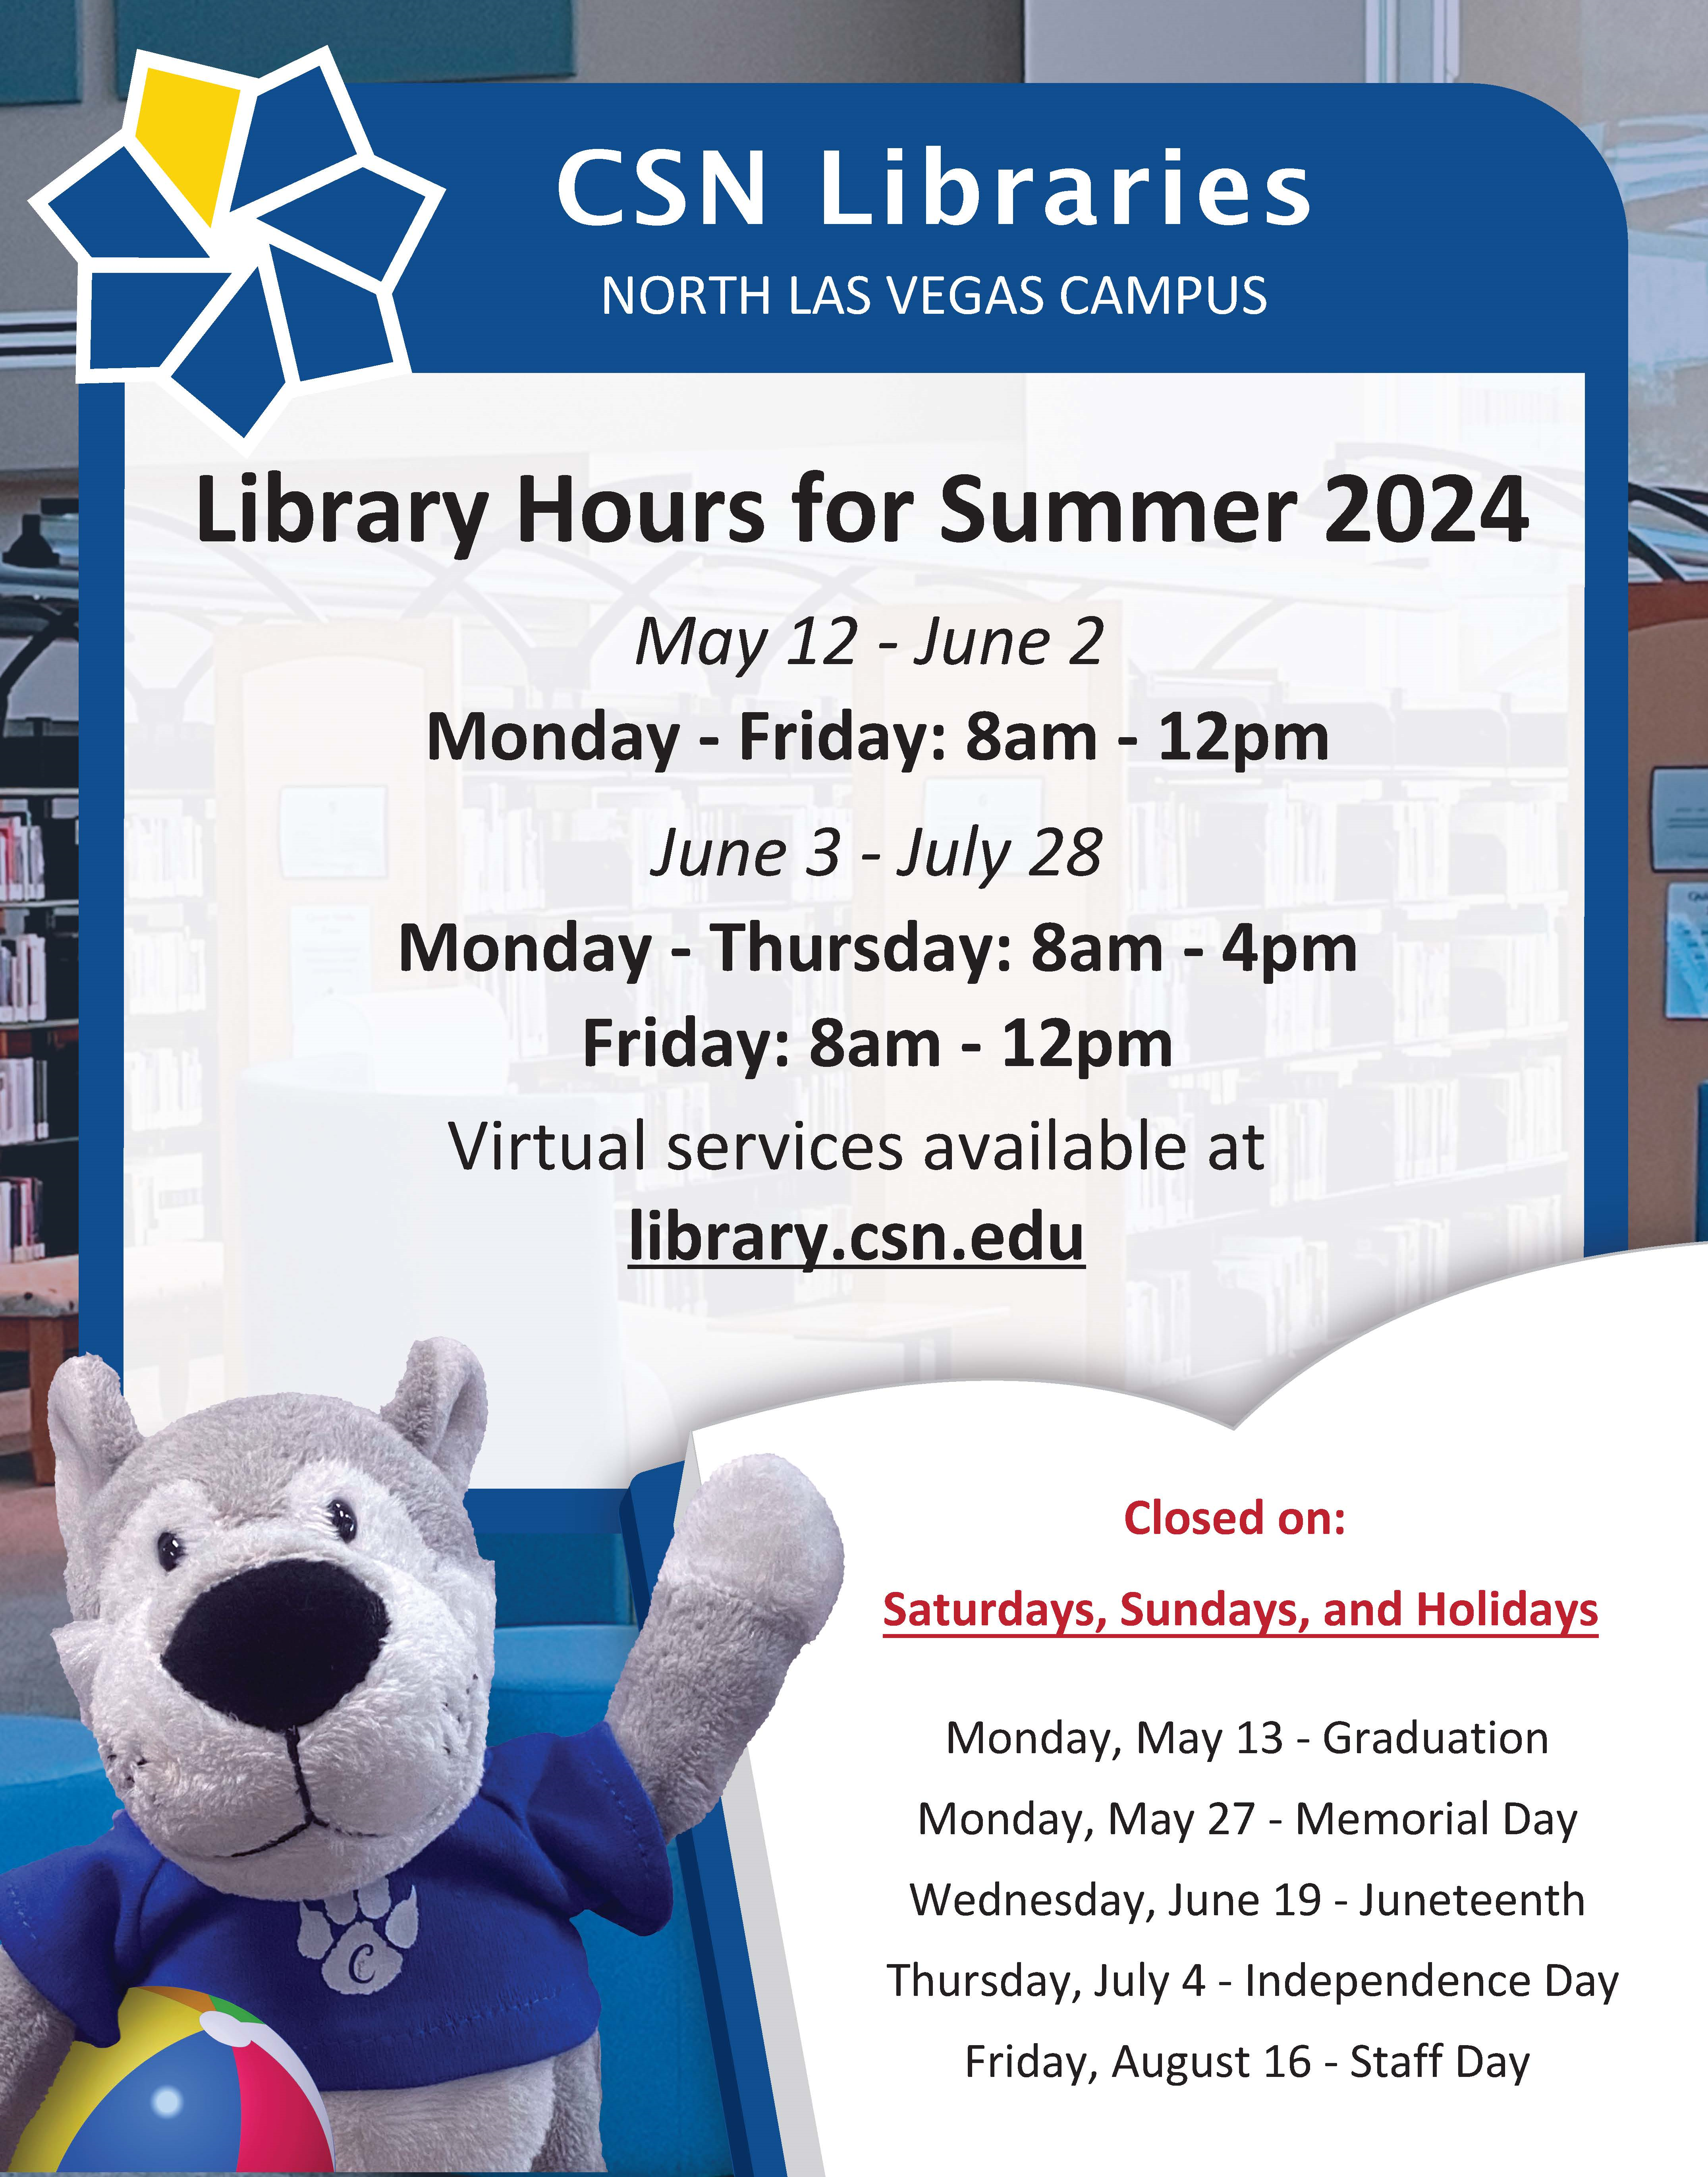 CSN Libraries Summer Hours - North Las Vegas Campus -  May 12-July 28